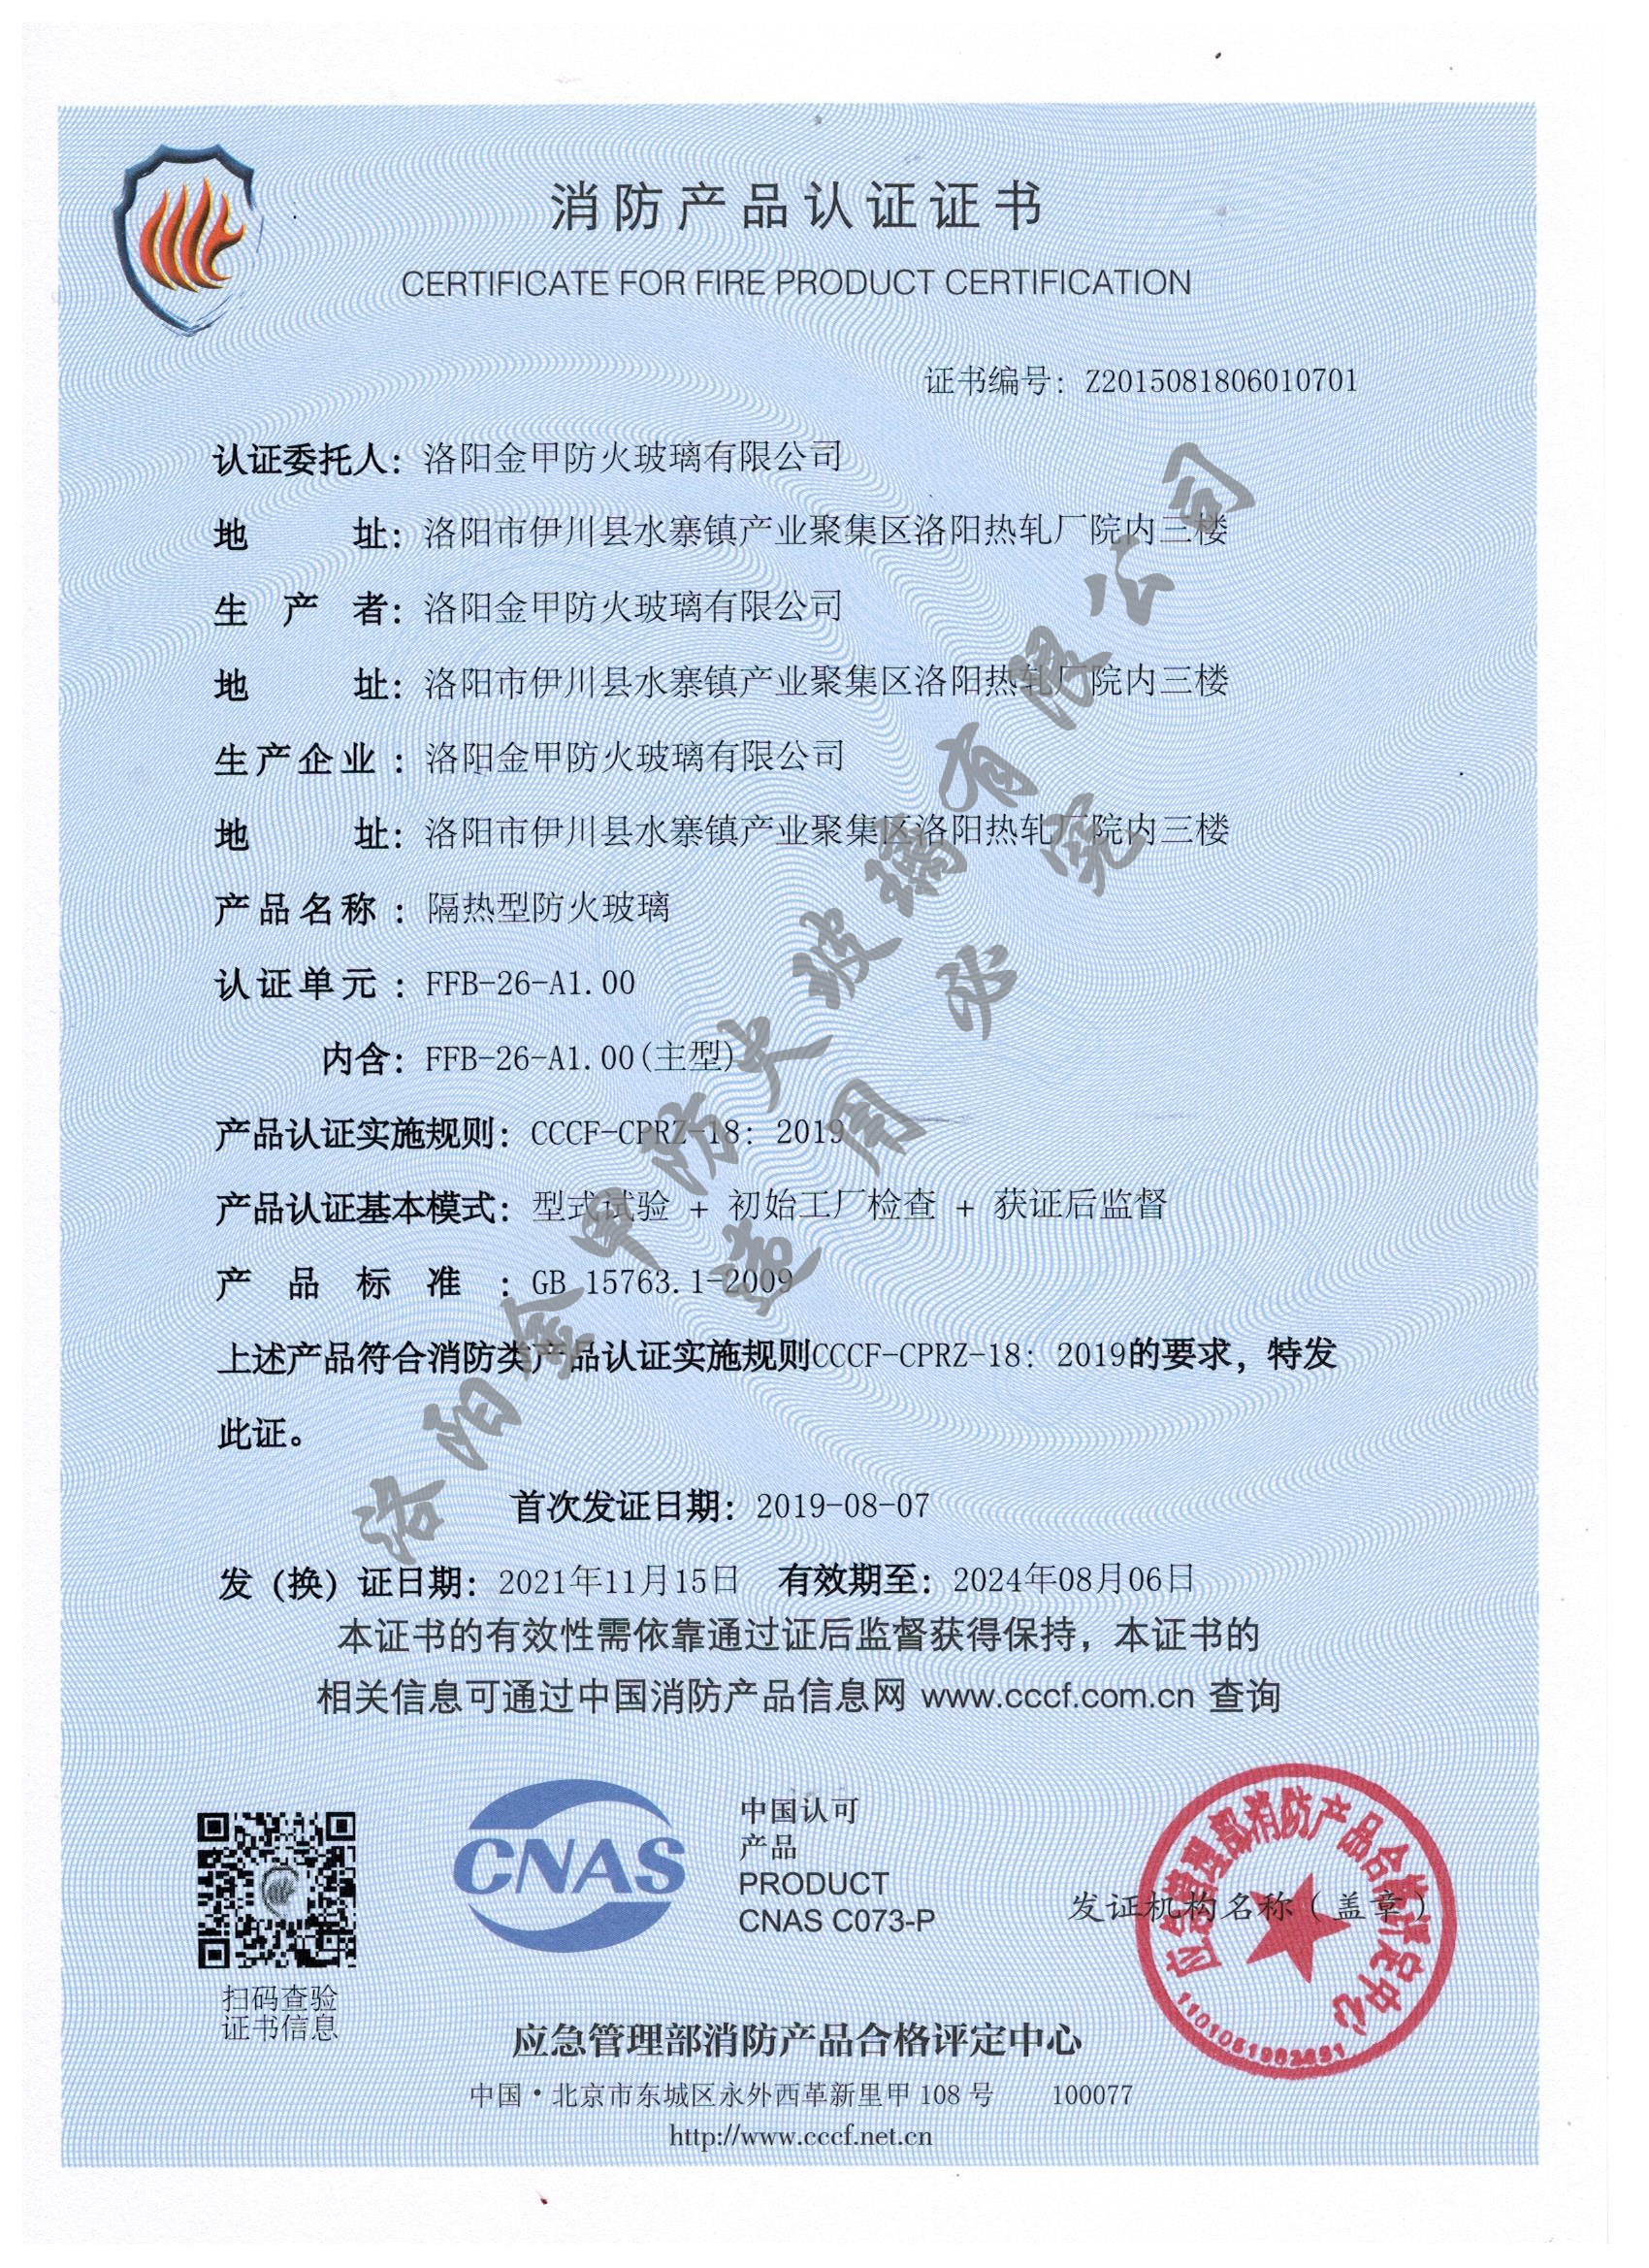 Voluntary certification of 26mm insulated fireproof glass